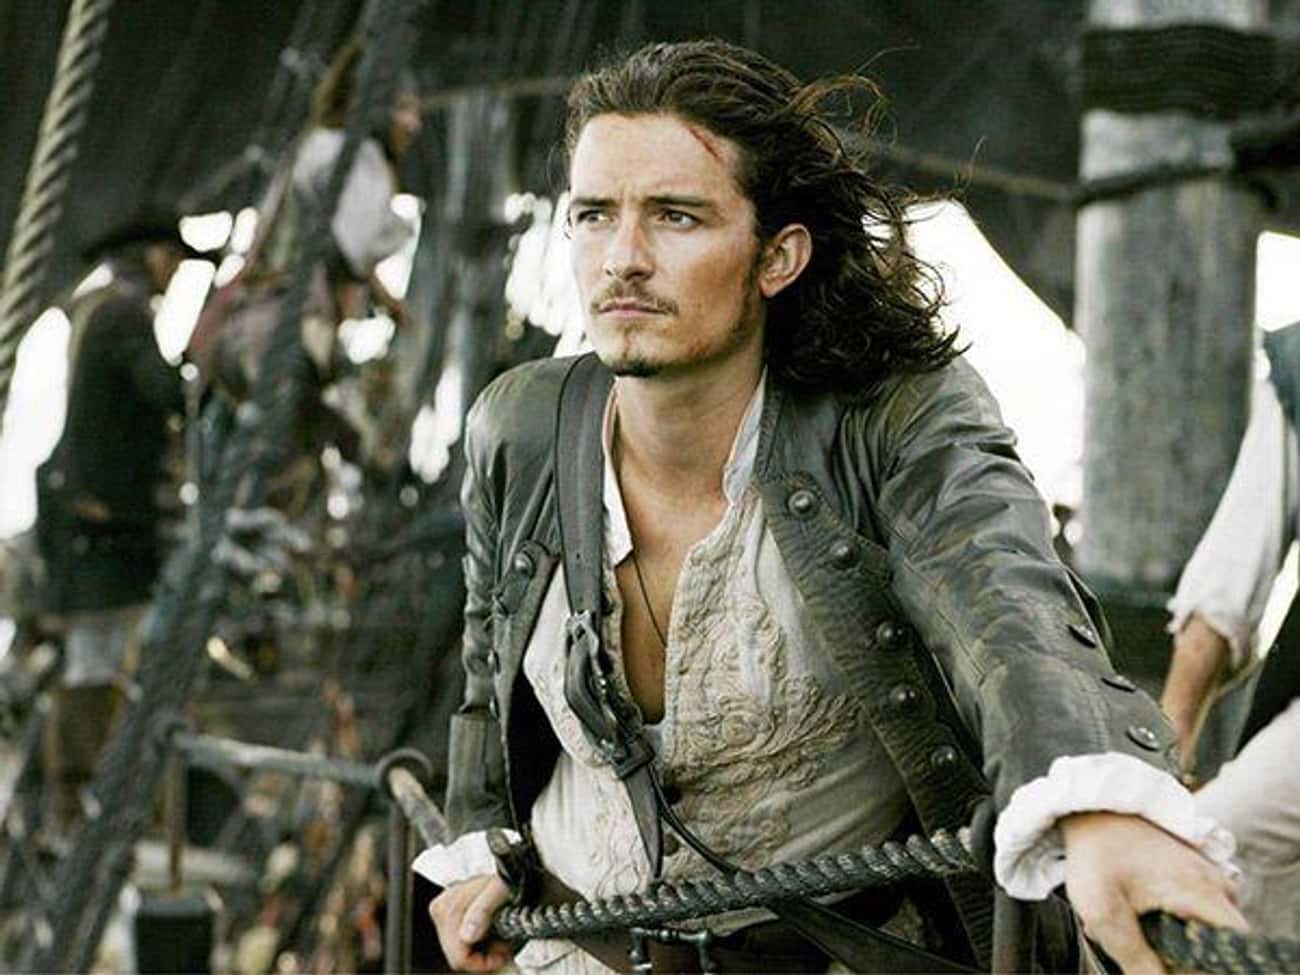 Pirates Could Be Only One Of Two Things: A Charismatic Roguish Scoundrel Or A Marauding Brute